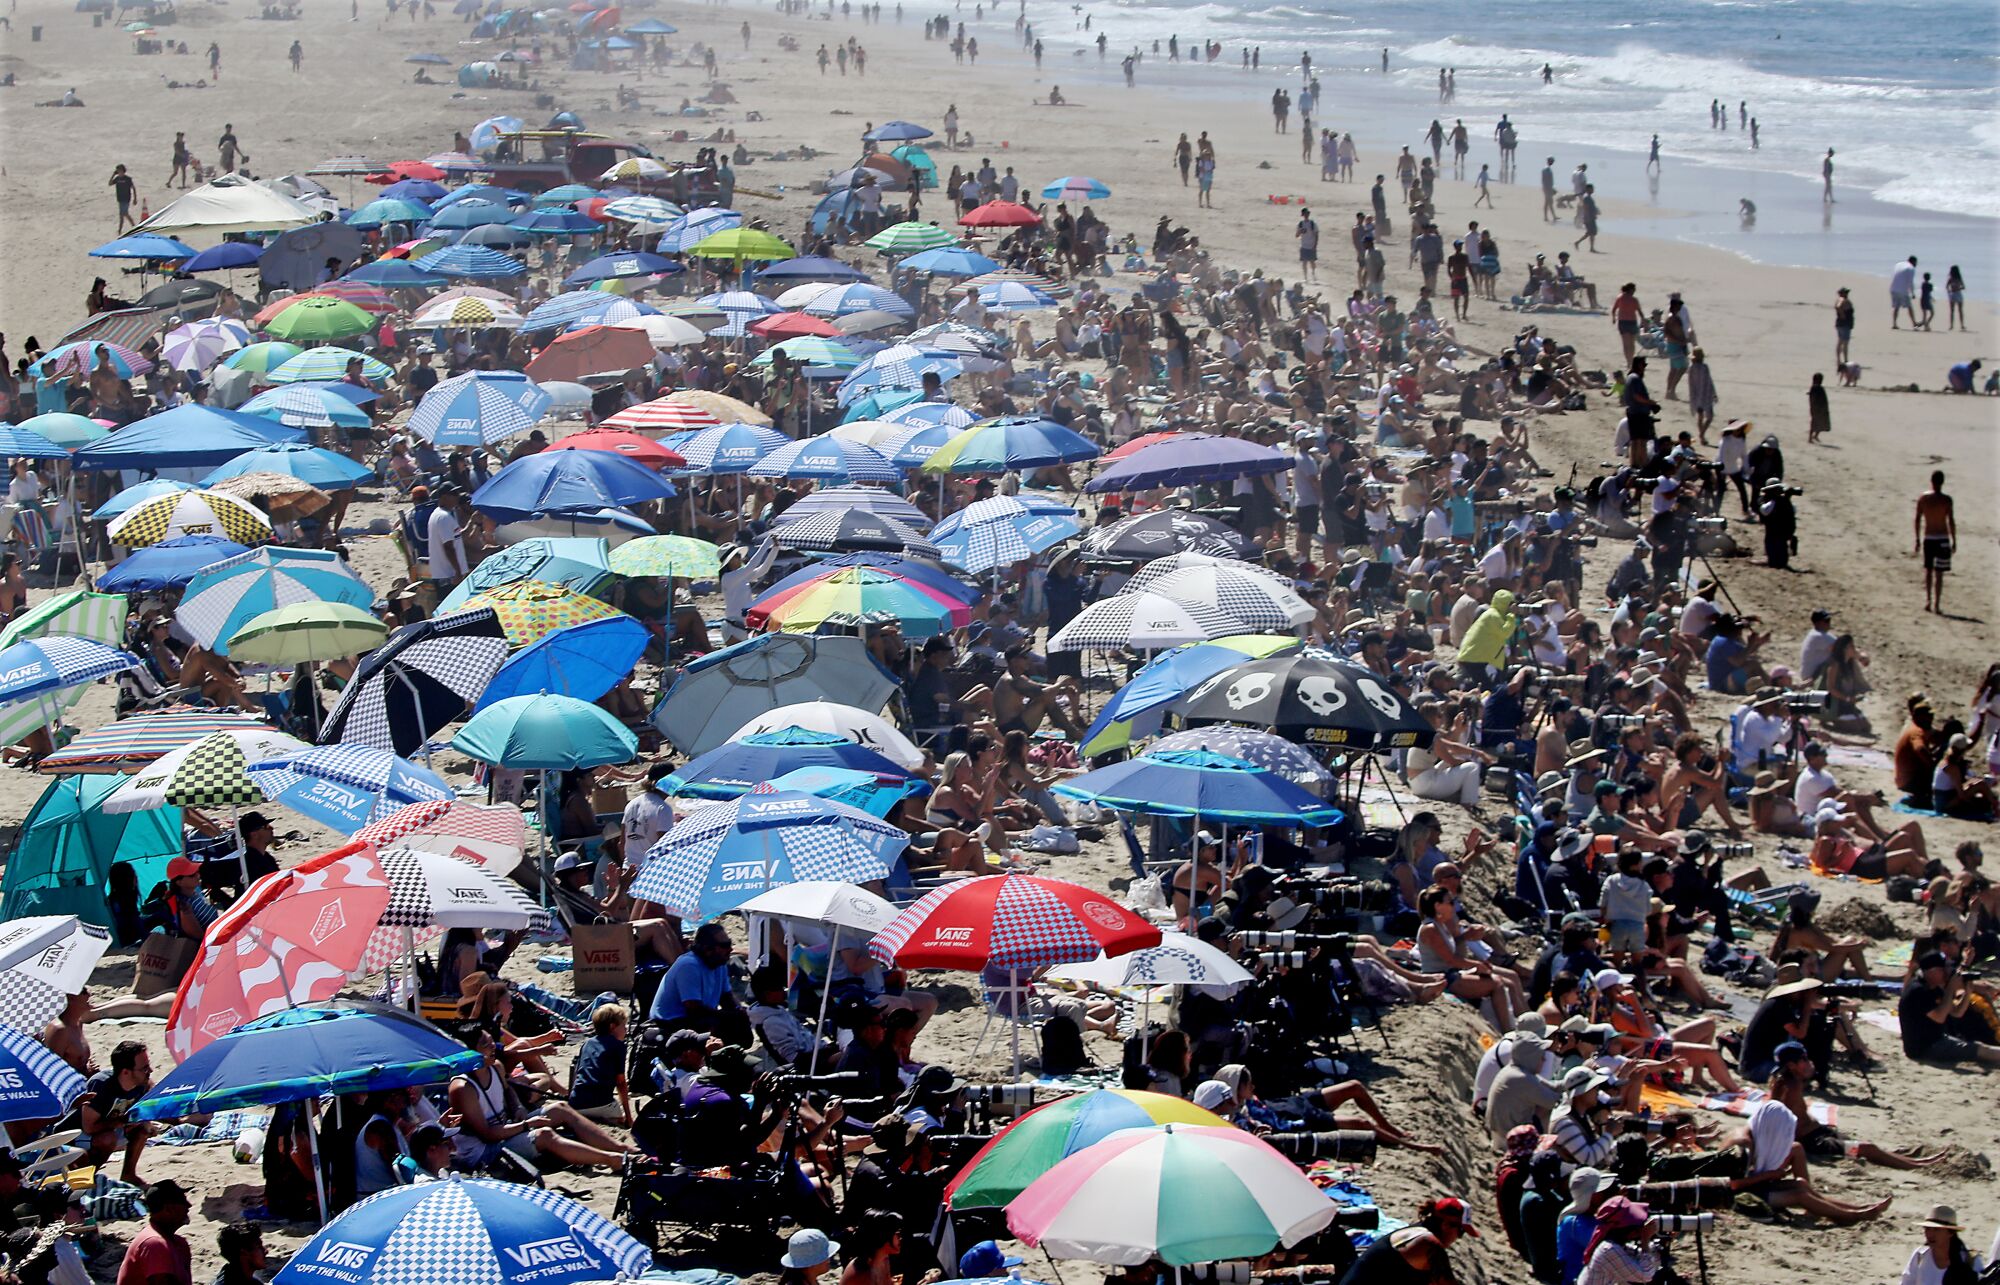 Surfing fans crowd Huntington Beach to watch the finals of the 2022 U.S. Open of Surfing.